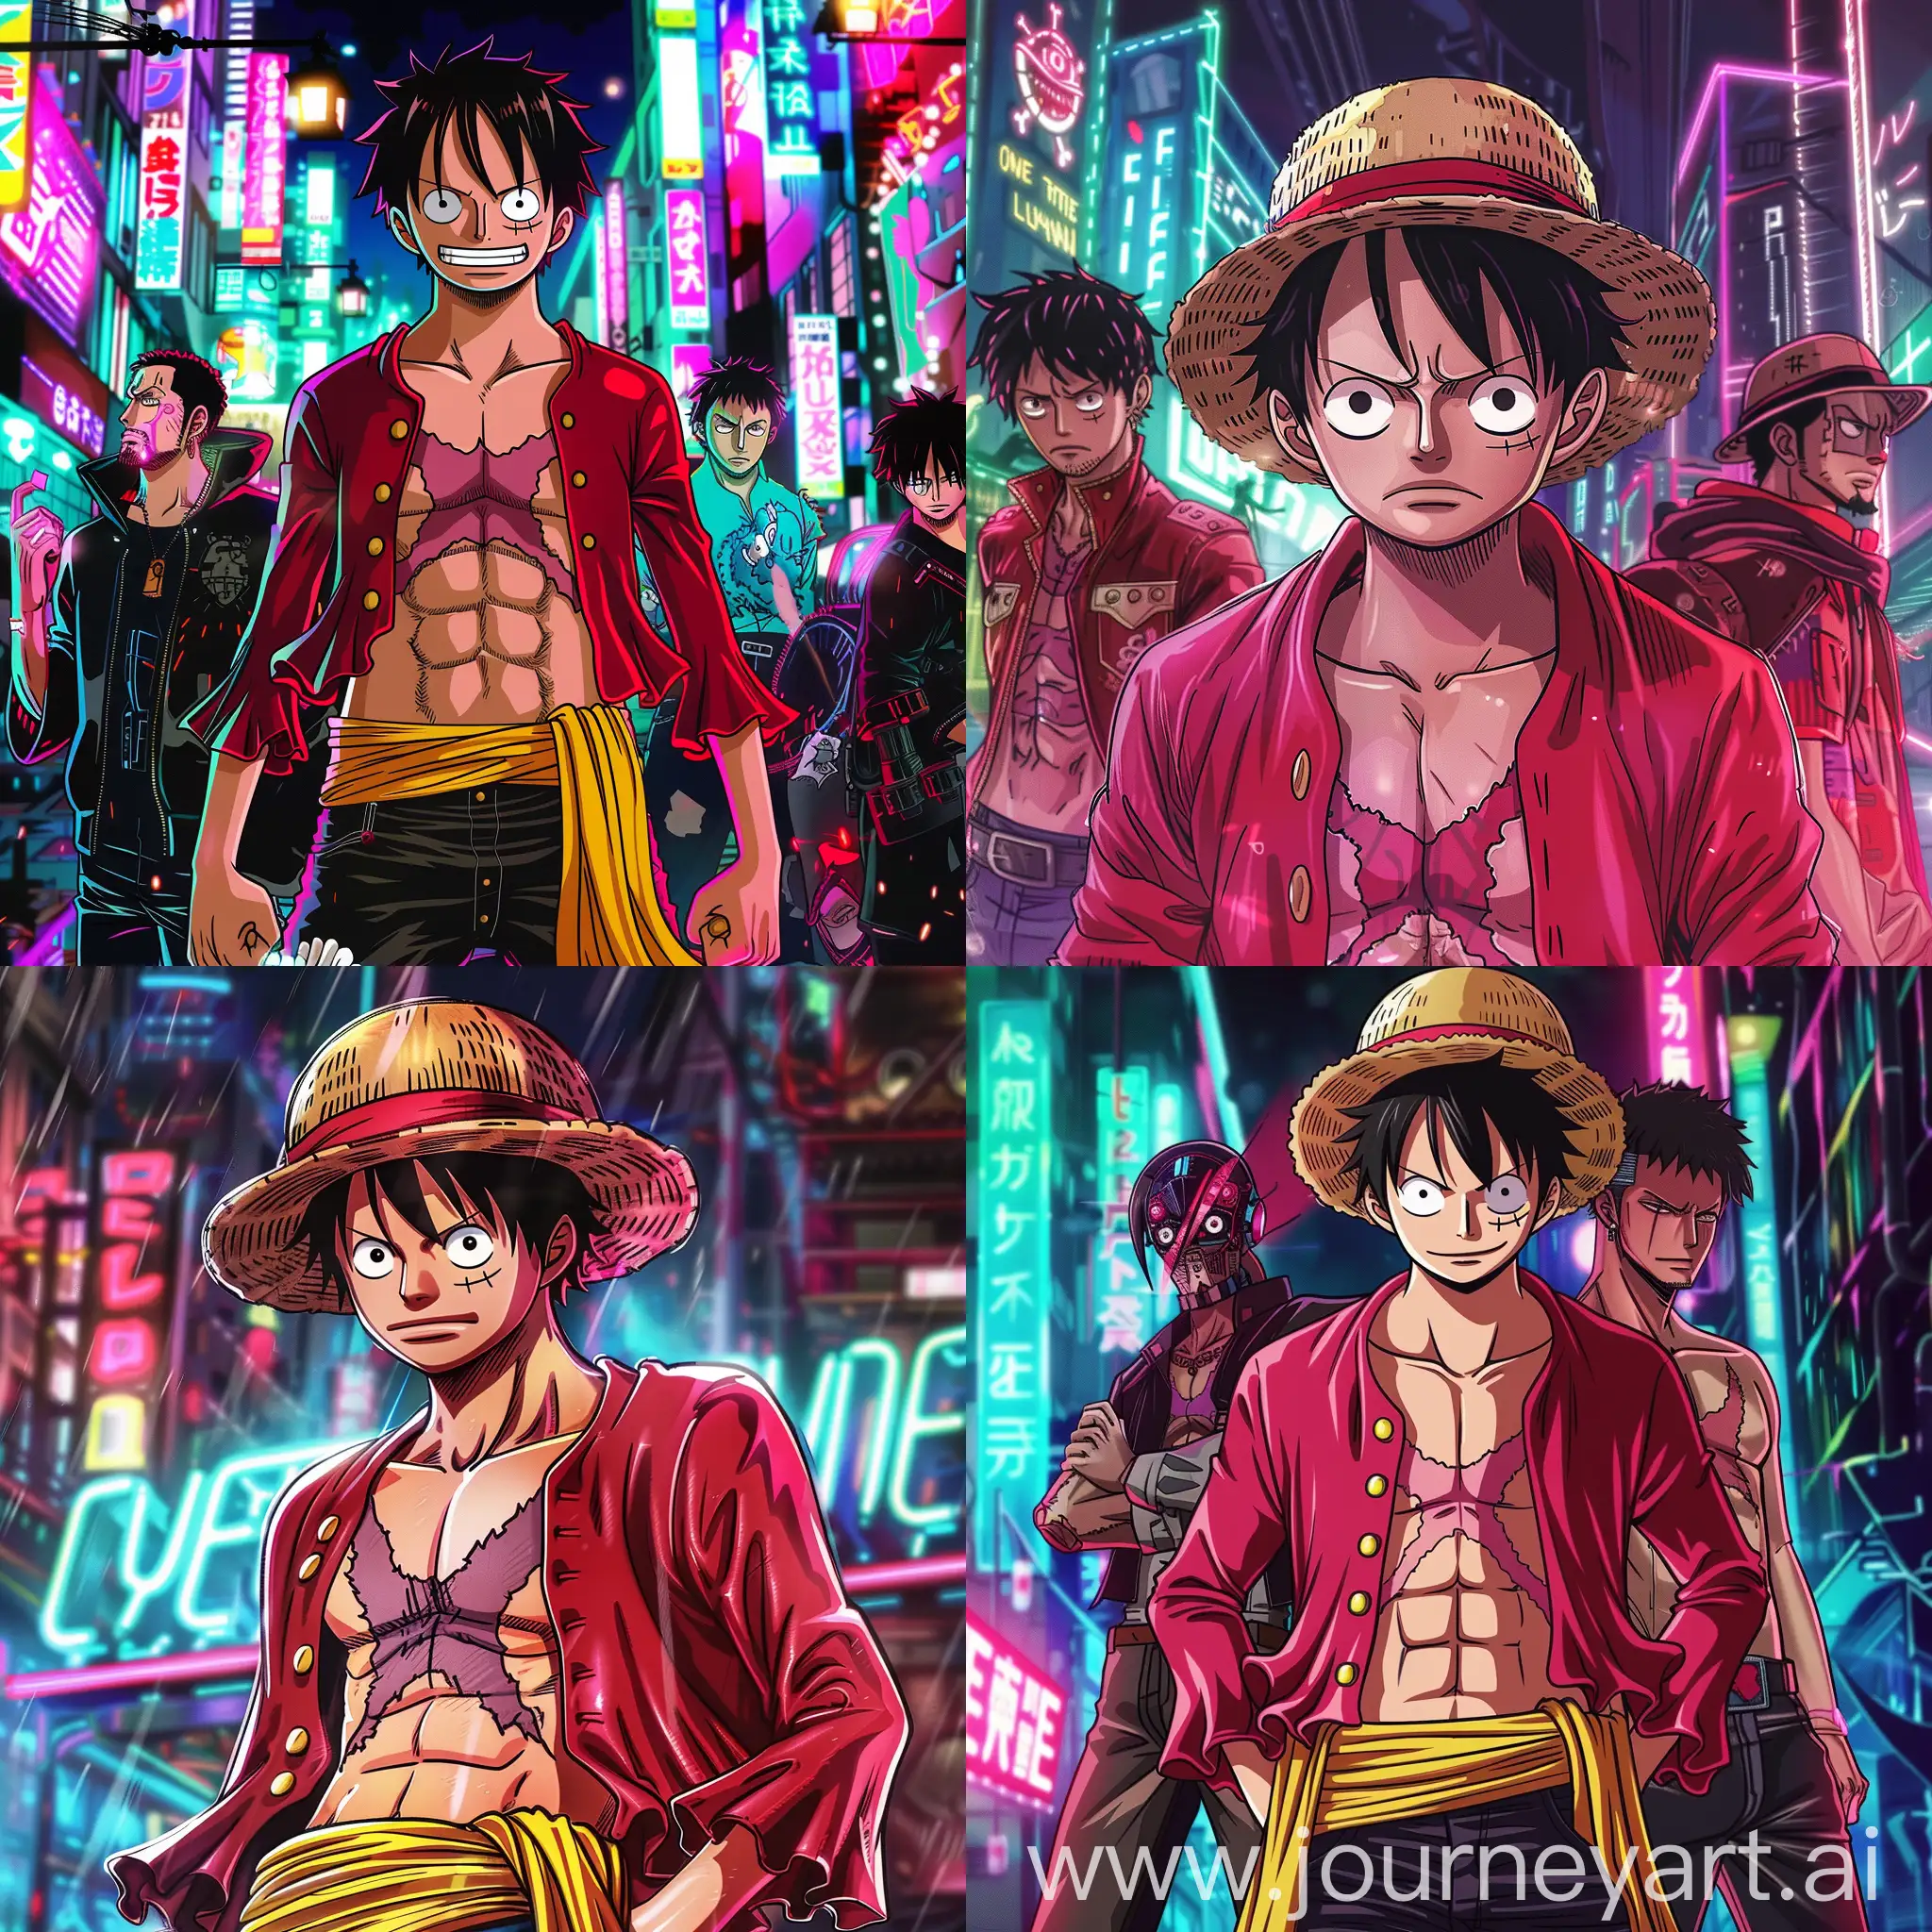 Luffy-Explores-Cyberpunk-World-with-David-and-Lucy